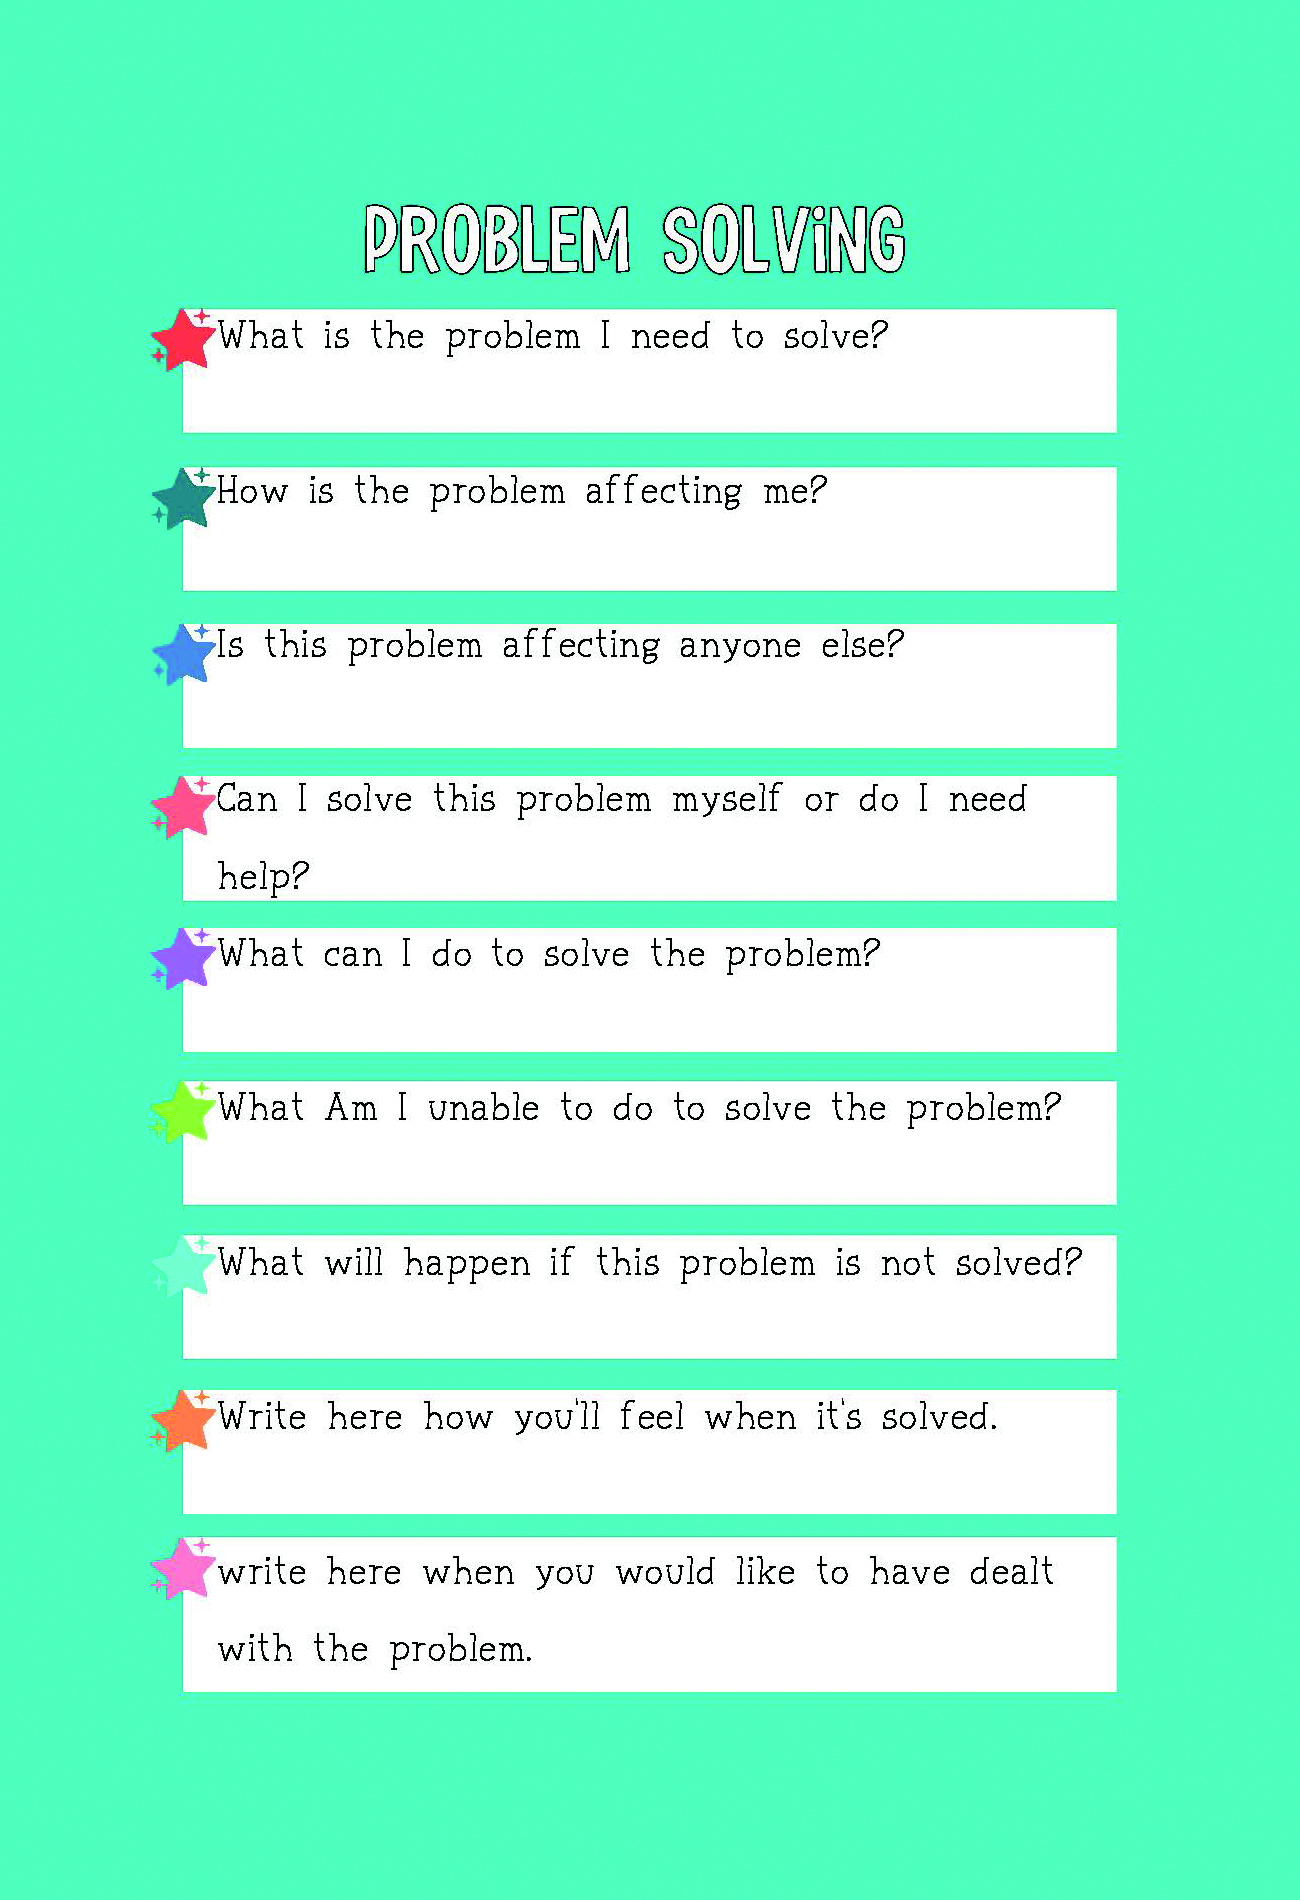 How to Solve a Problem - Digital Download